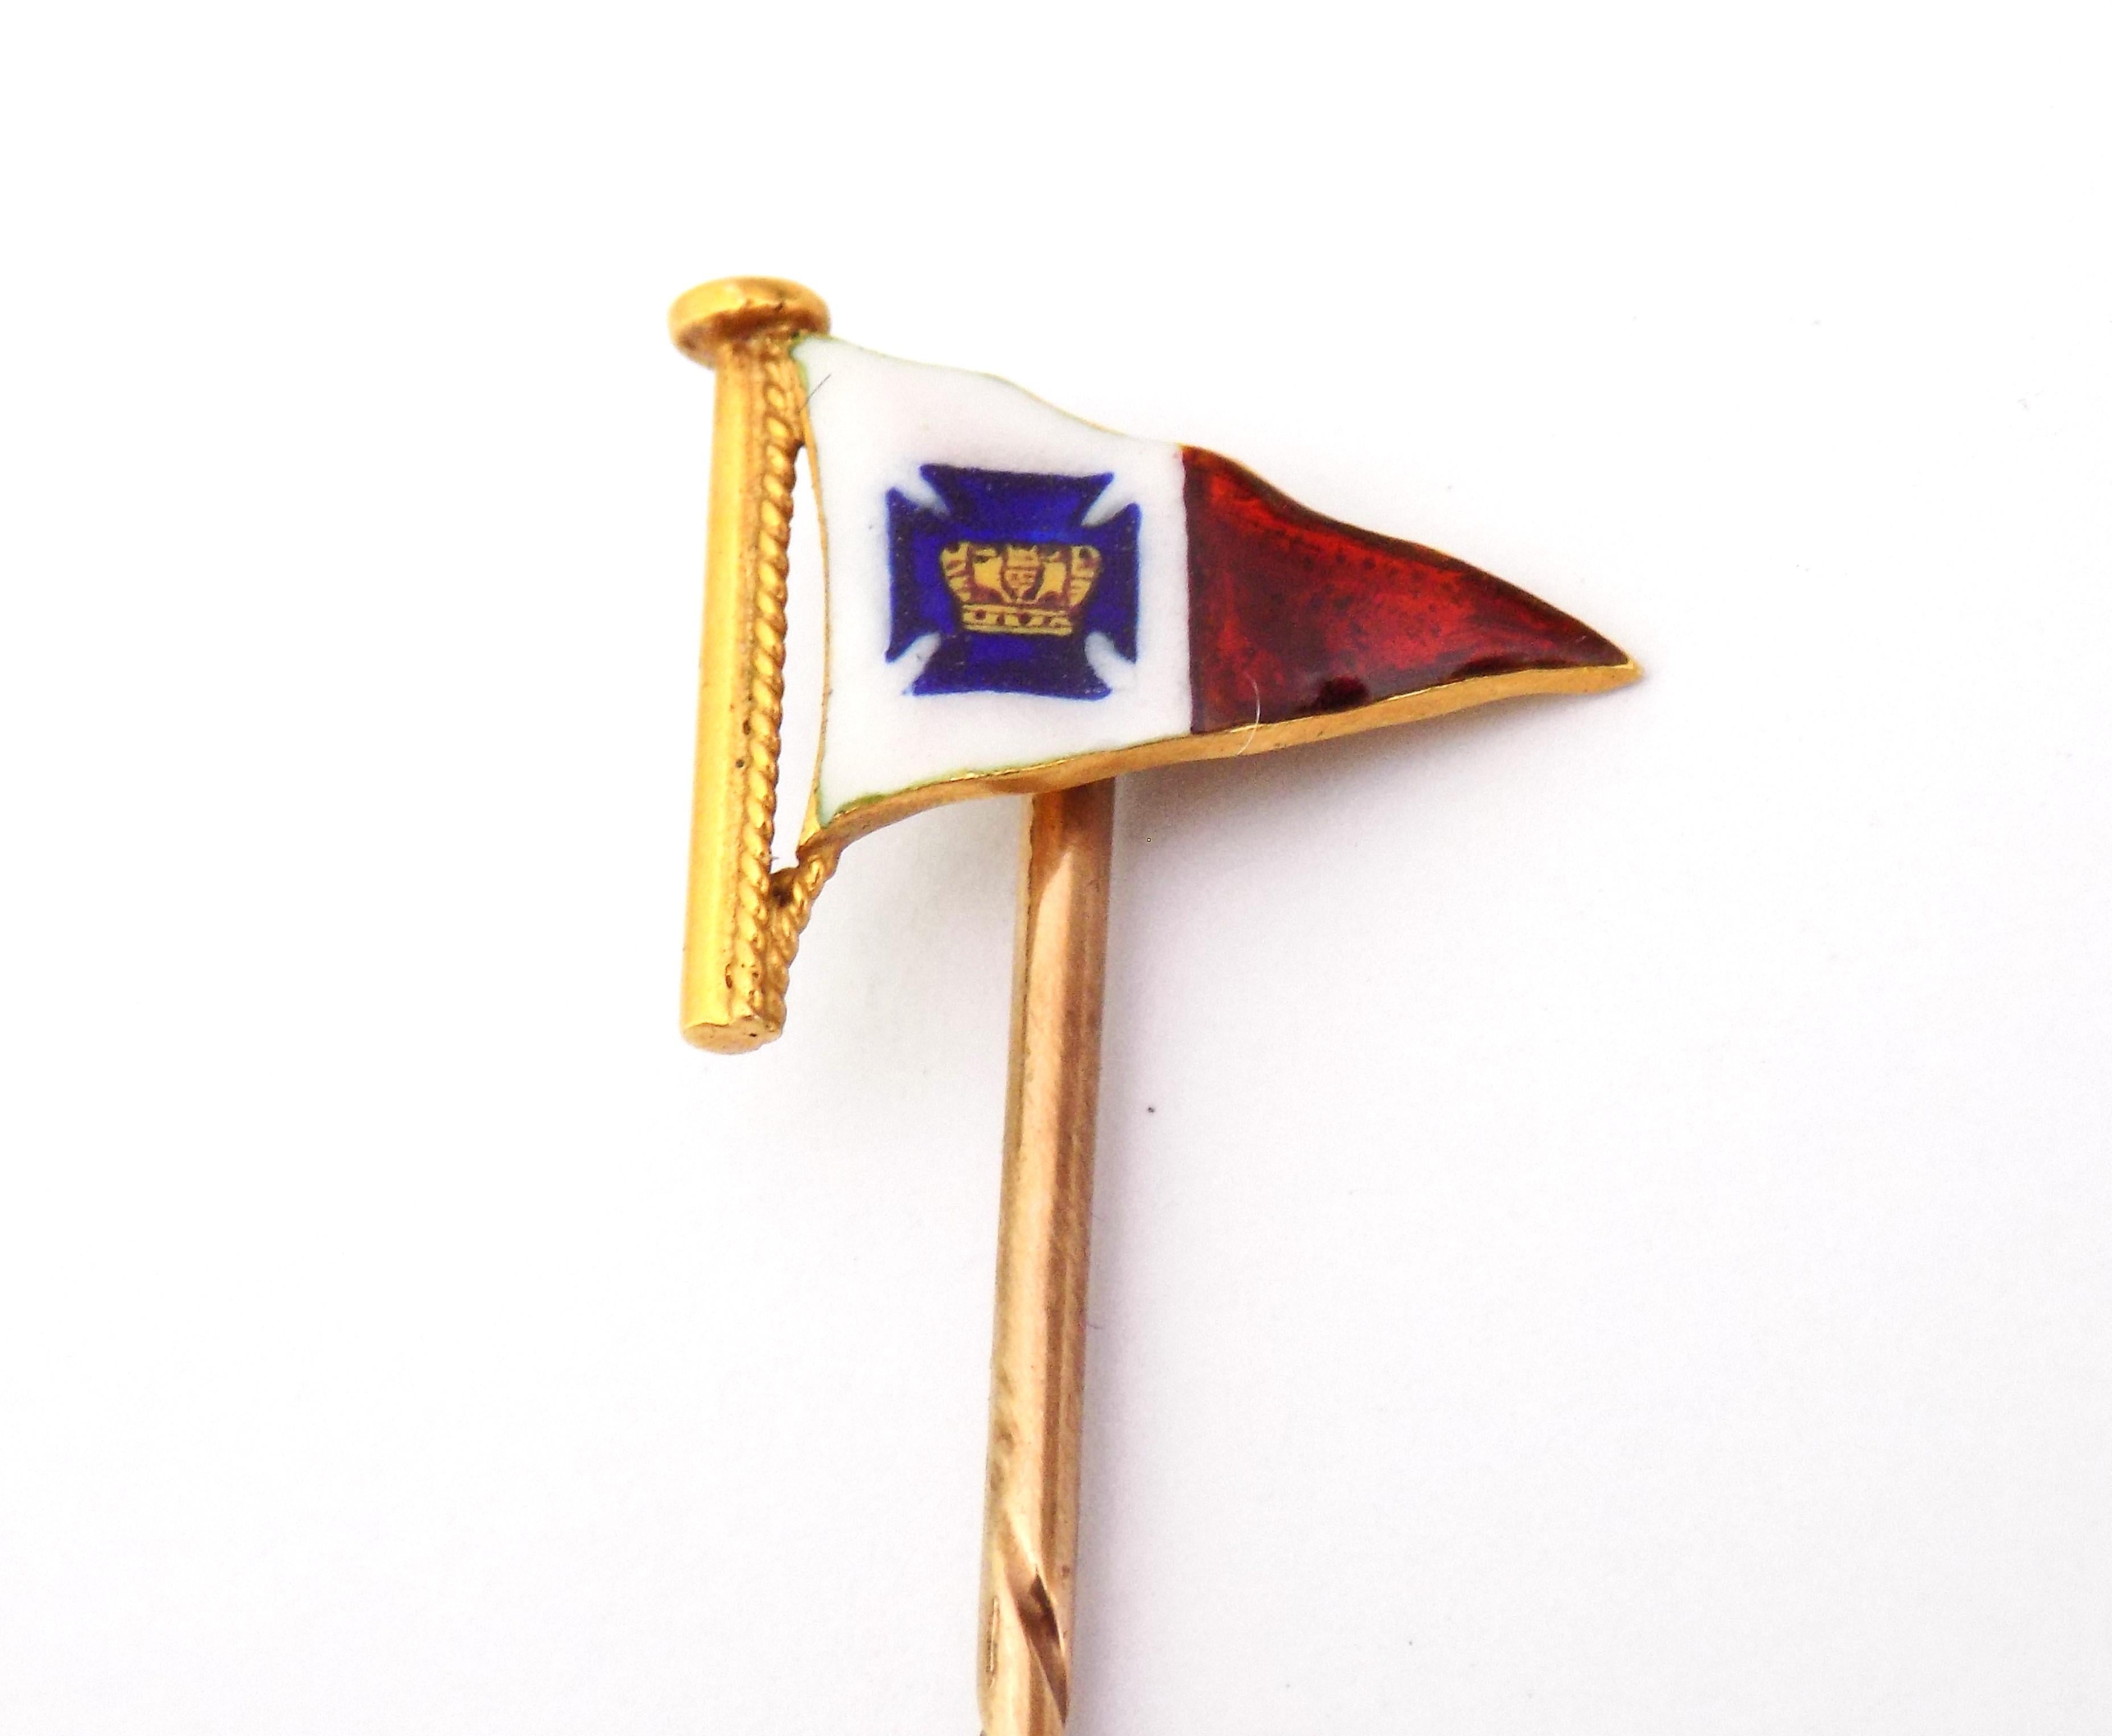 An 18 Karat Gold tie stick pin made by the famous company Benzie of Cowes. Benzie was founded in 1862 by Mr Simpson Benzie. The company made fine quality jewellery for royalty and yachting aristocracy. This stick pin was made for the Royal Cruising